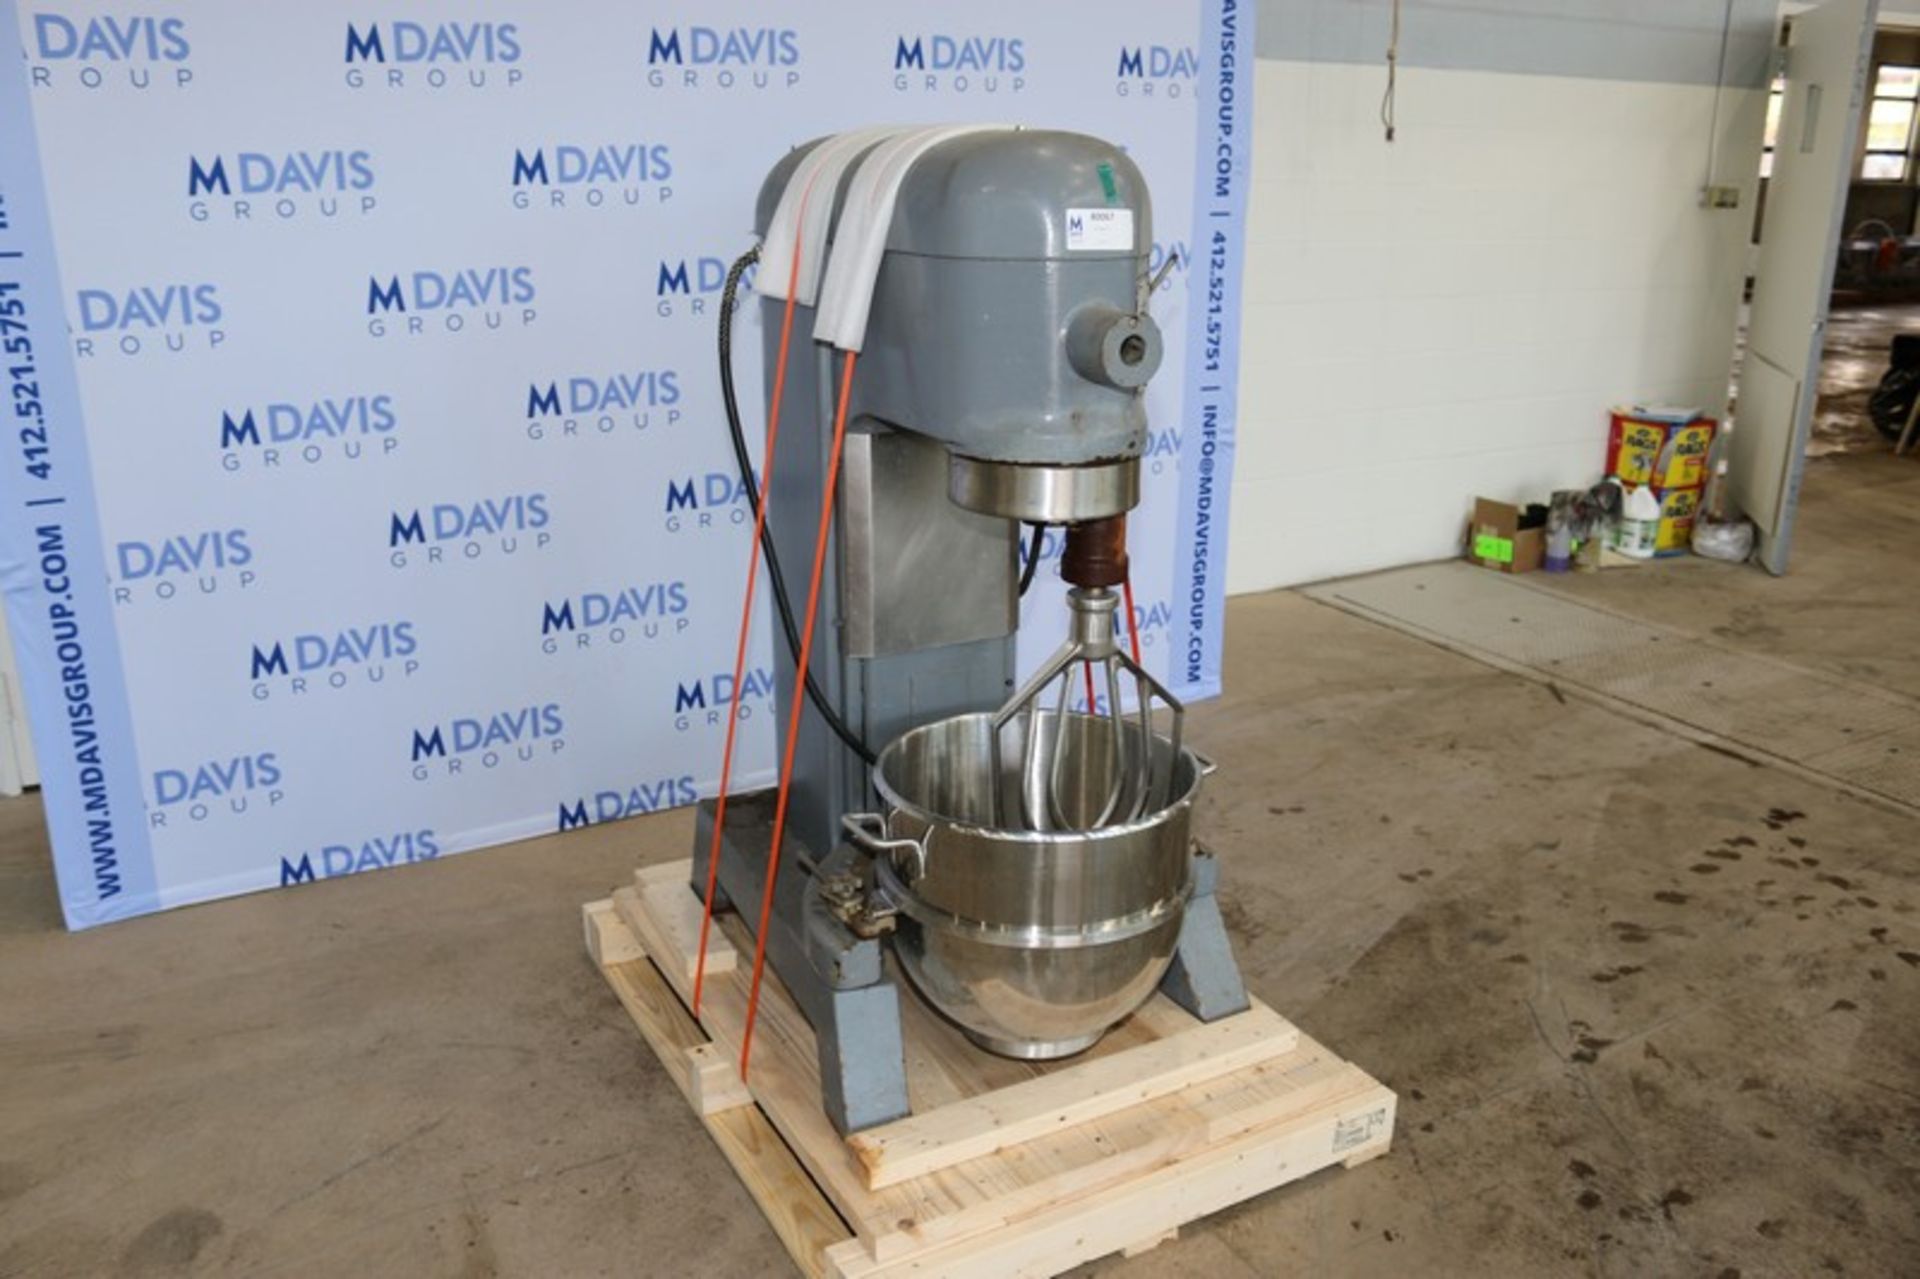 Hobrt Mixer, M/N L-800, S/N 11-213-617, 200 Volts, 1725 RPM Motor, with 1-1/2 hp Motor, with S/S